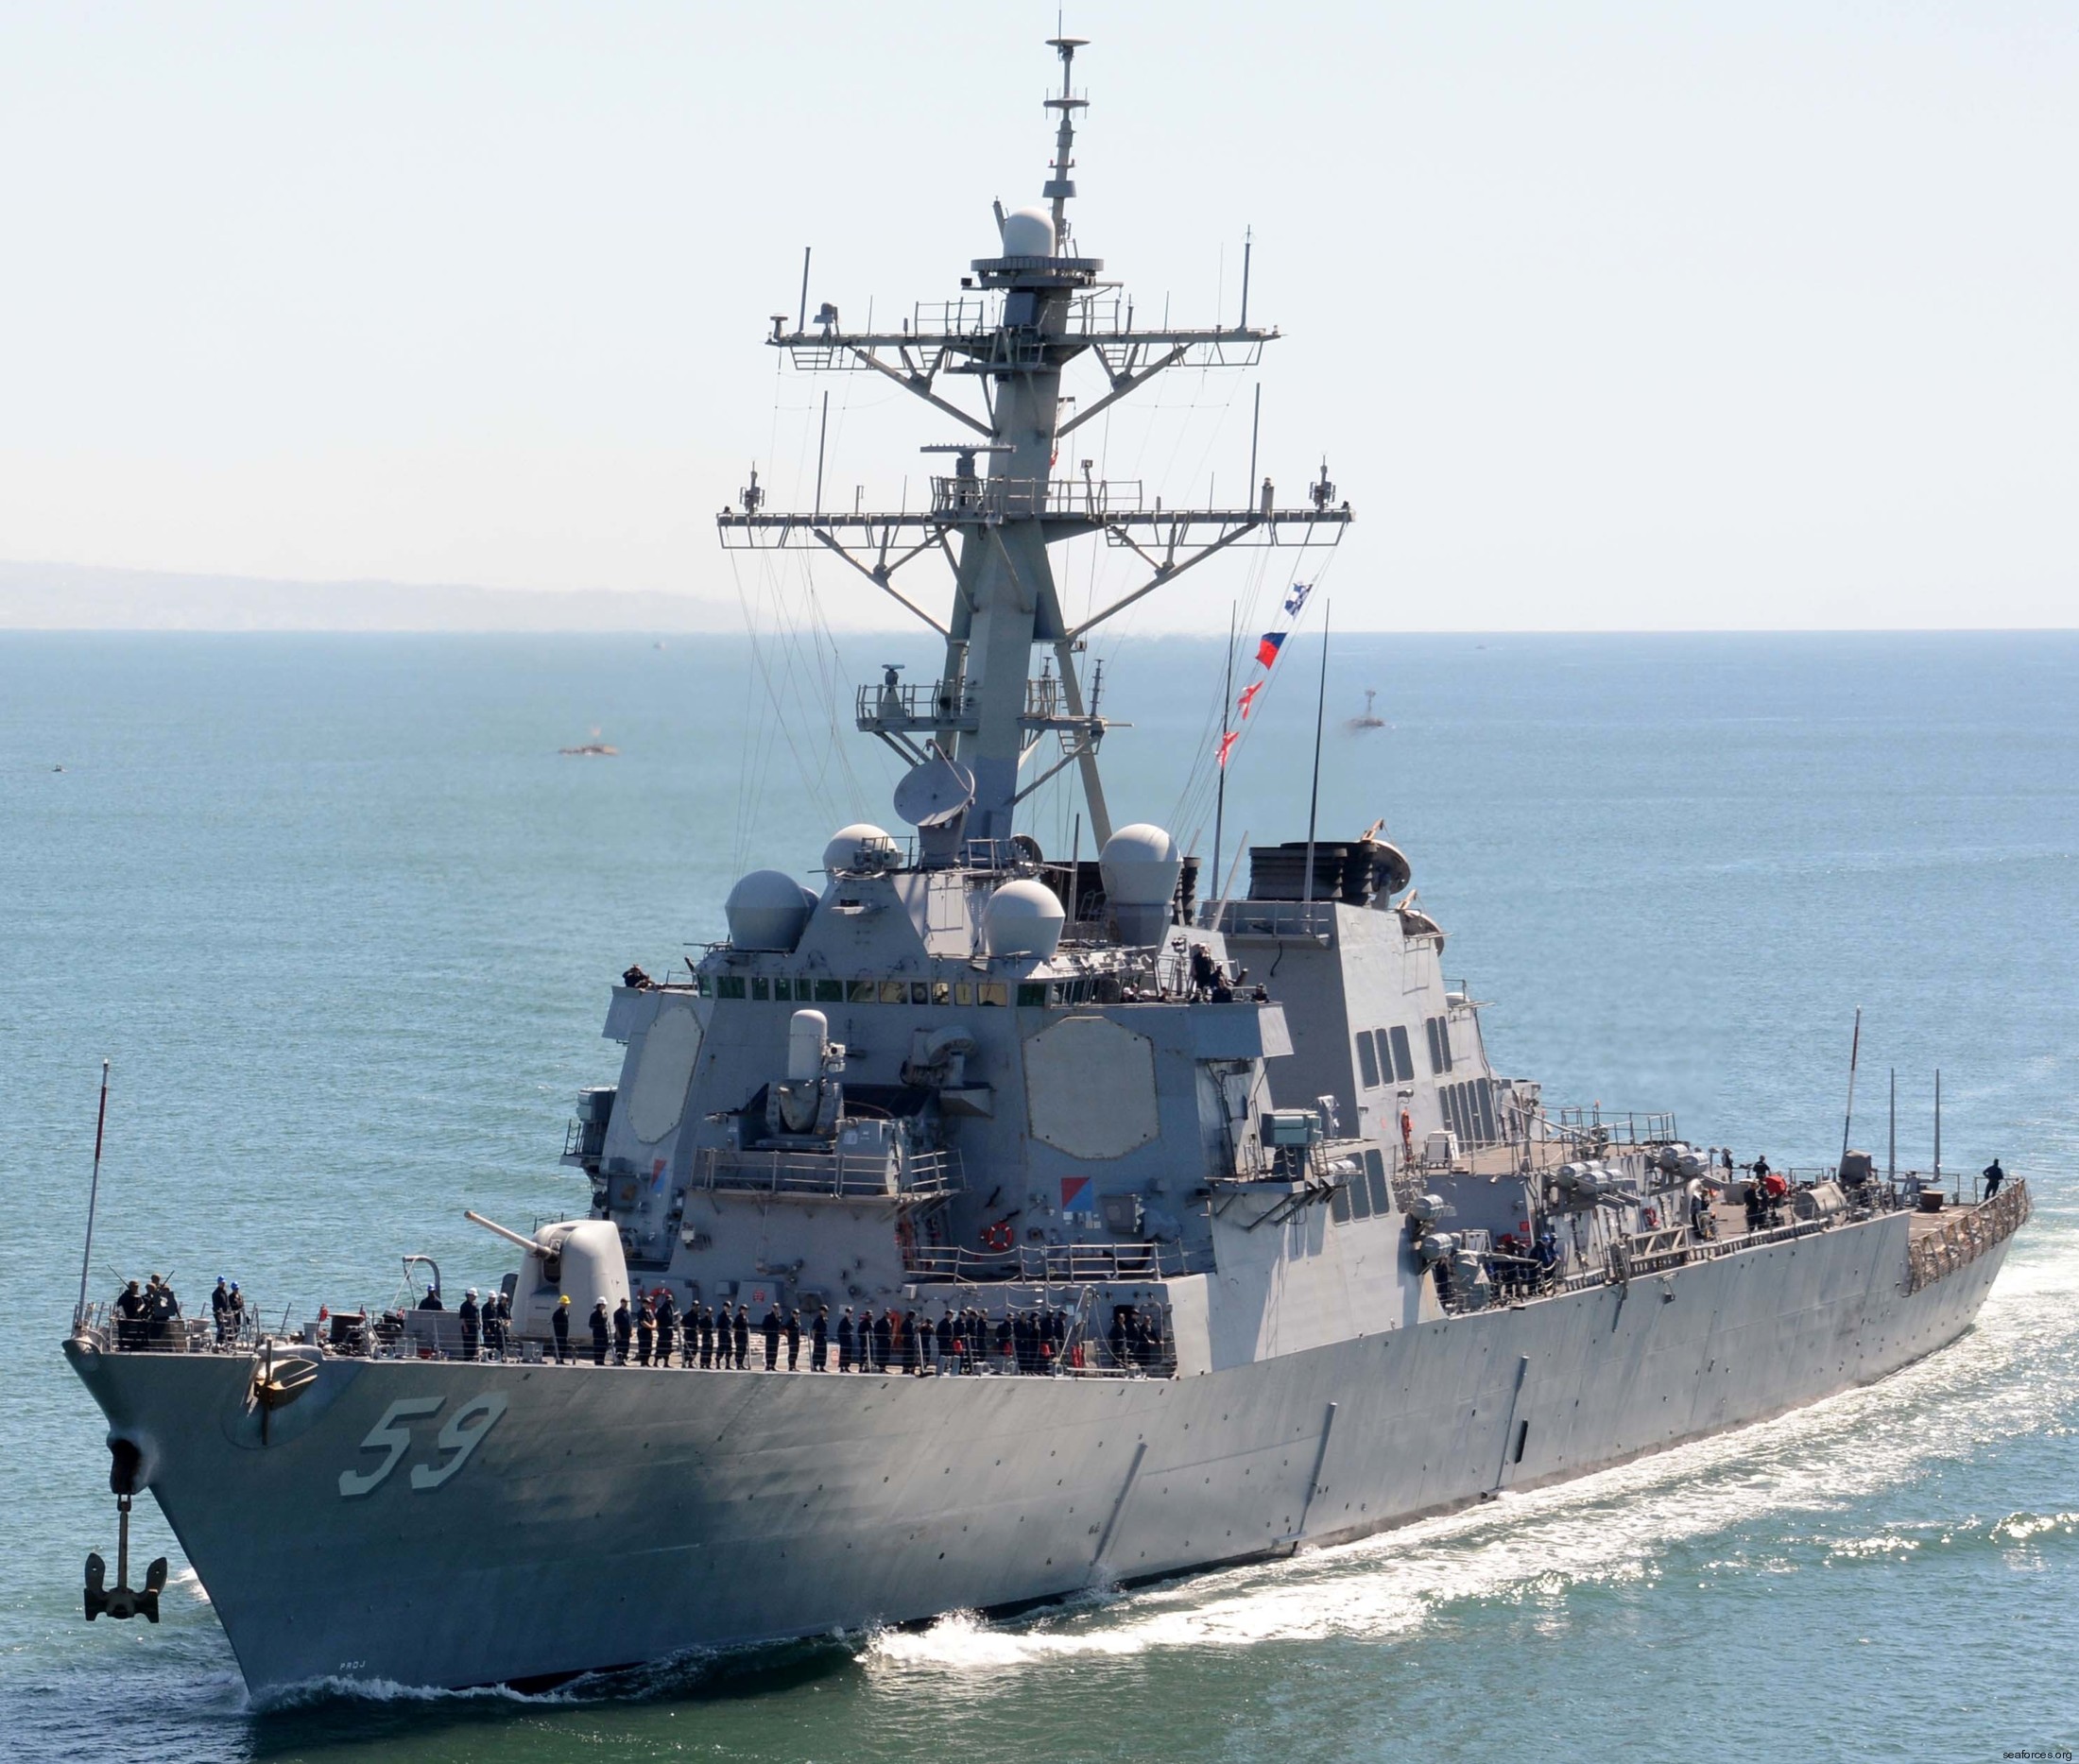 ddg-59 uss russell arleigh burke class guided missile destroyer us navy aegis 60